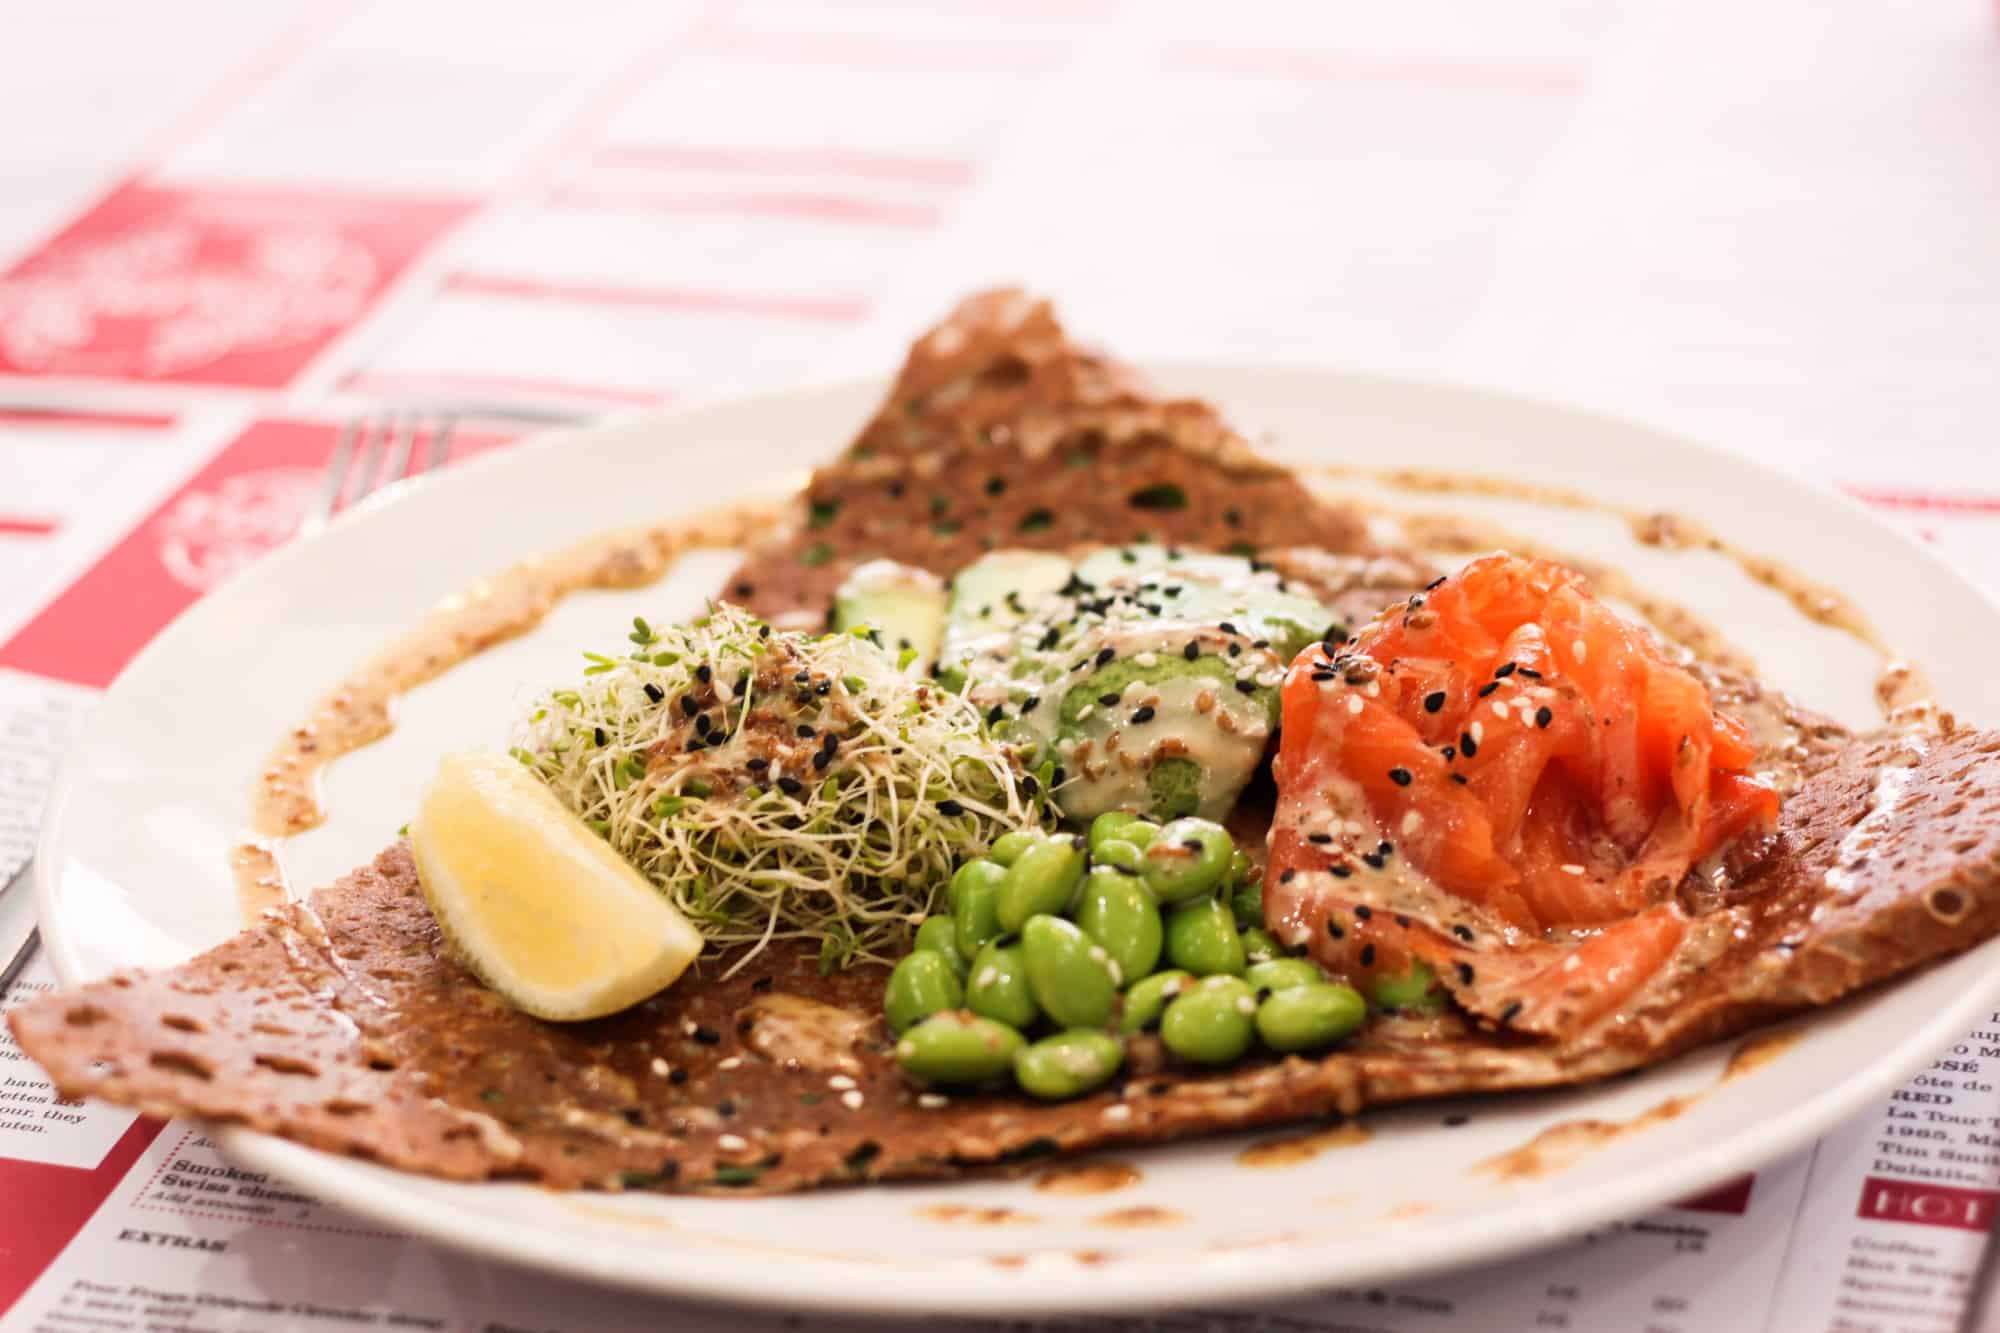 Four Frogs creperie - Poke Galette